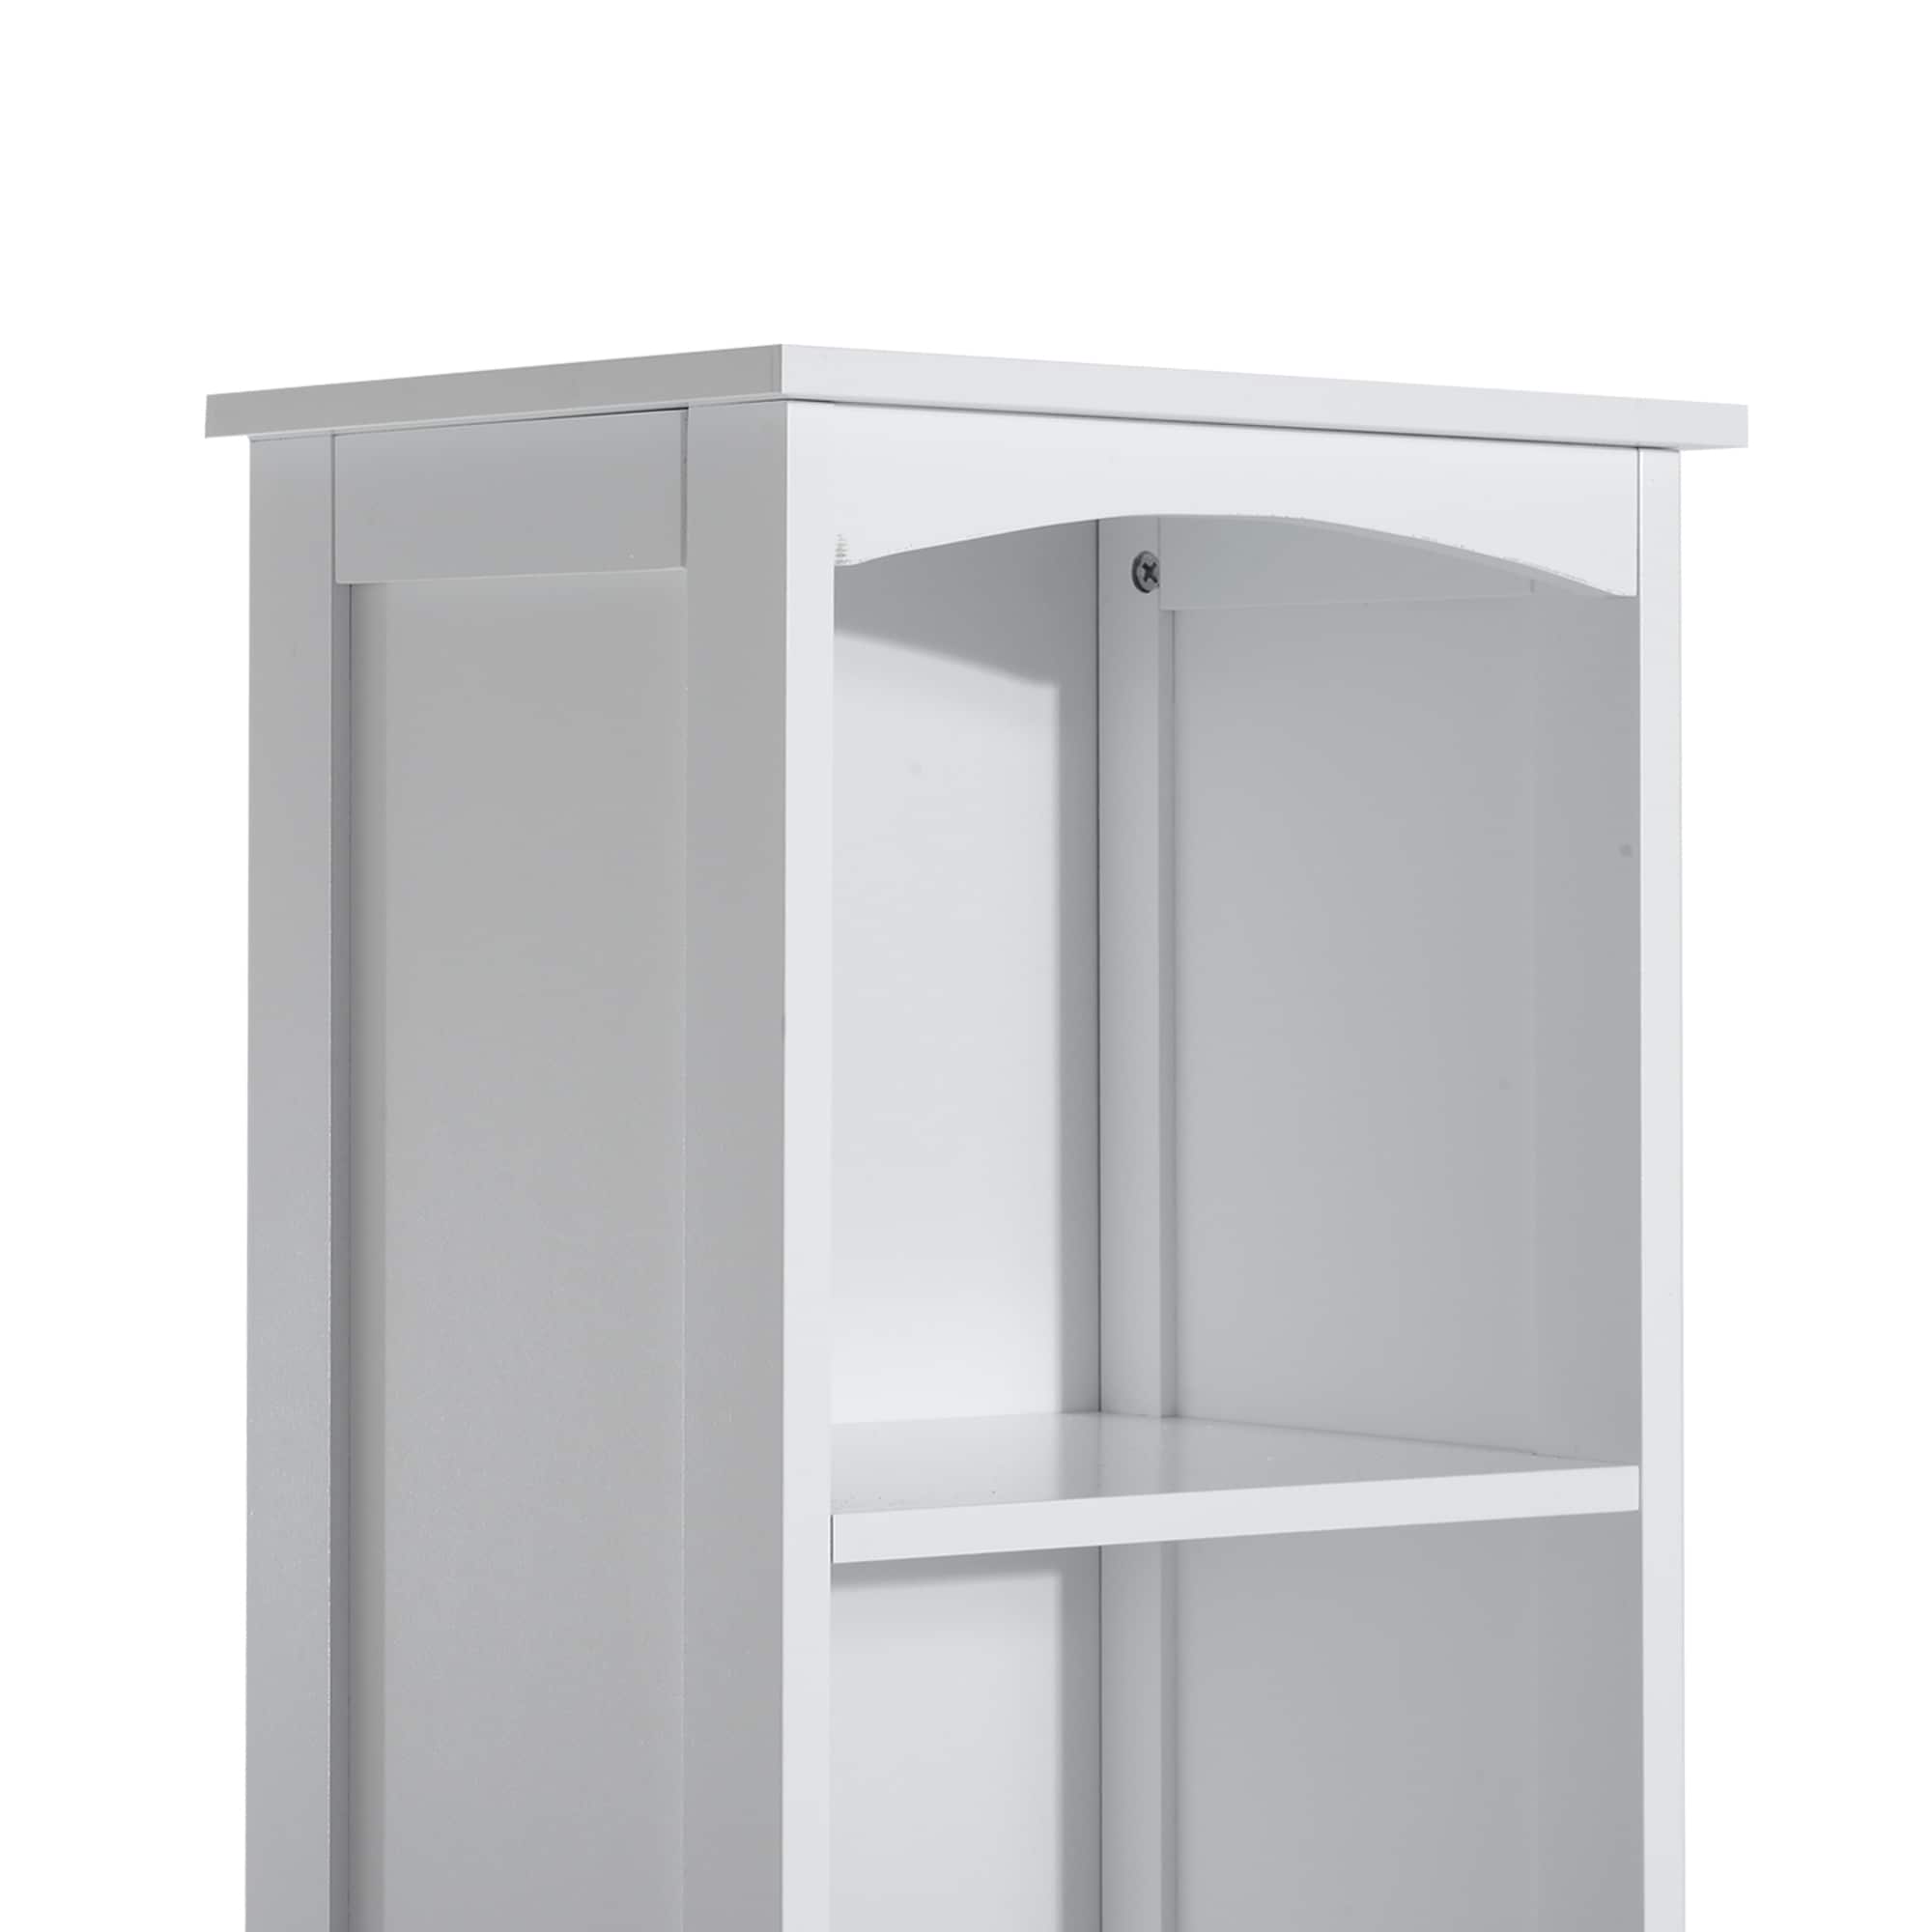 https://ak1.ostkcdn.com/images/products/is/images/direct/3b41e07a9b7011e7af578bfa3b00ec59b7c91538/HOMCOM-67%22-Tall-Bathroom-Storage-Cabinet%2C-Freestanding-Linen-Tower-with-3-Tier-Shelf%2C-Narrow-Side-Floor-Organizer%2C-White.jpg